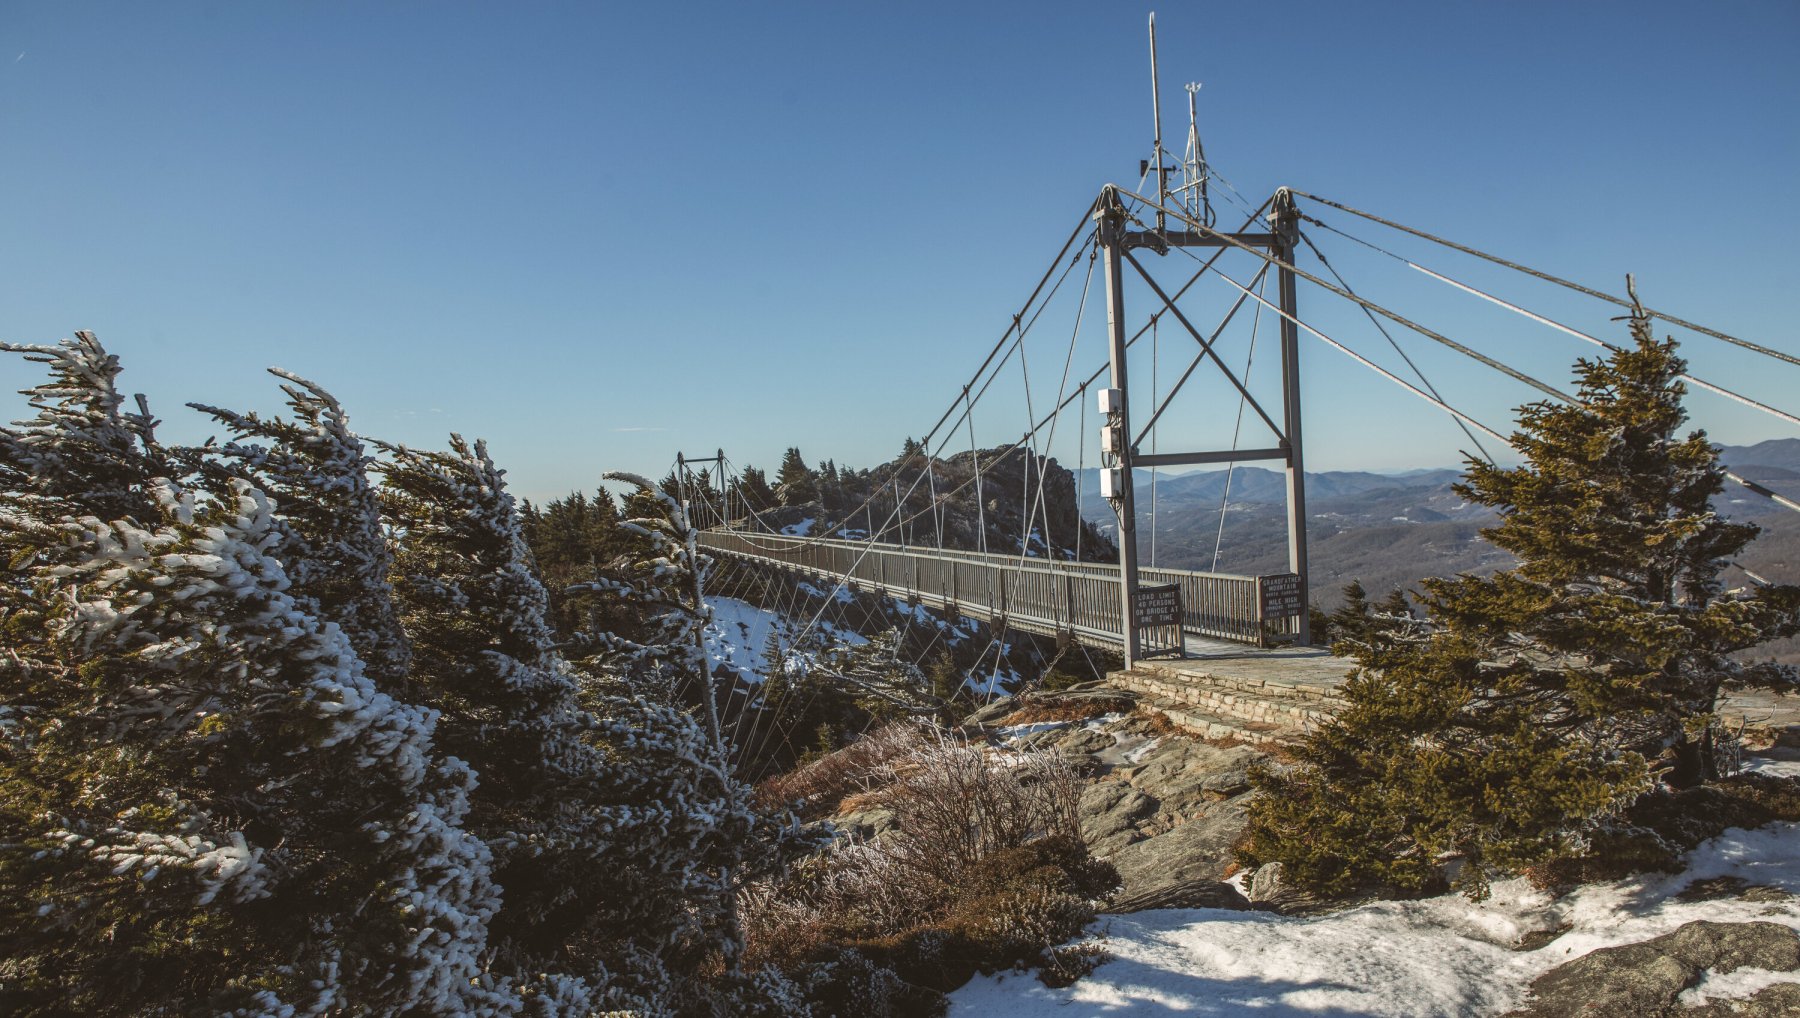 Suspension bridge at top of mountain extending to other side of mountain, surrounded by snowy evergreen trees during daytime